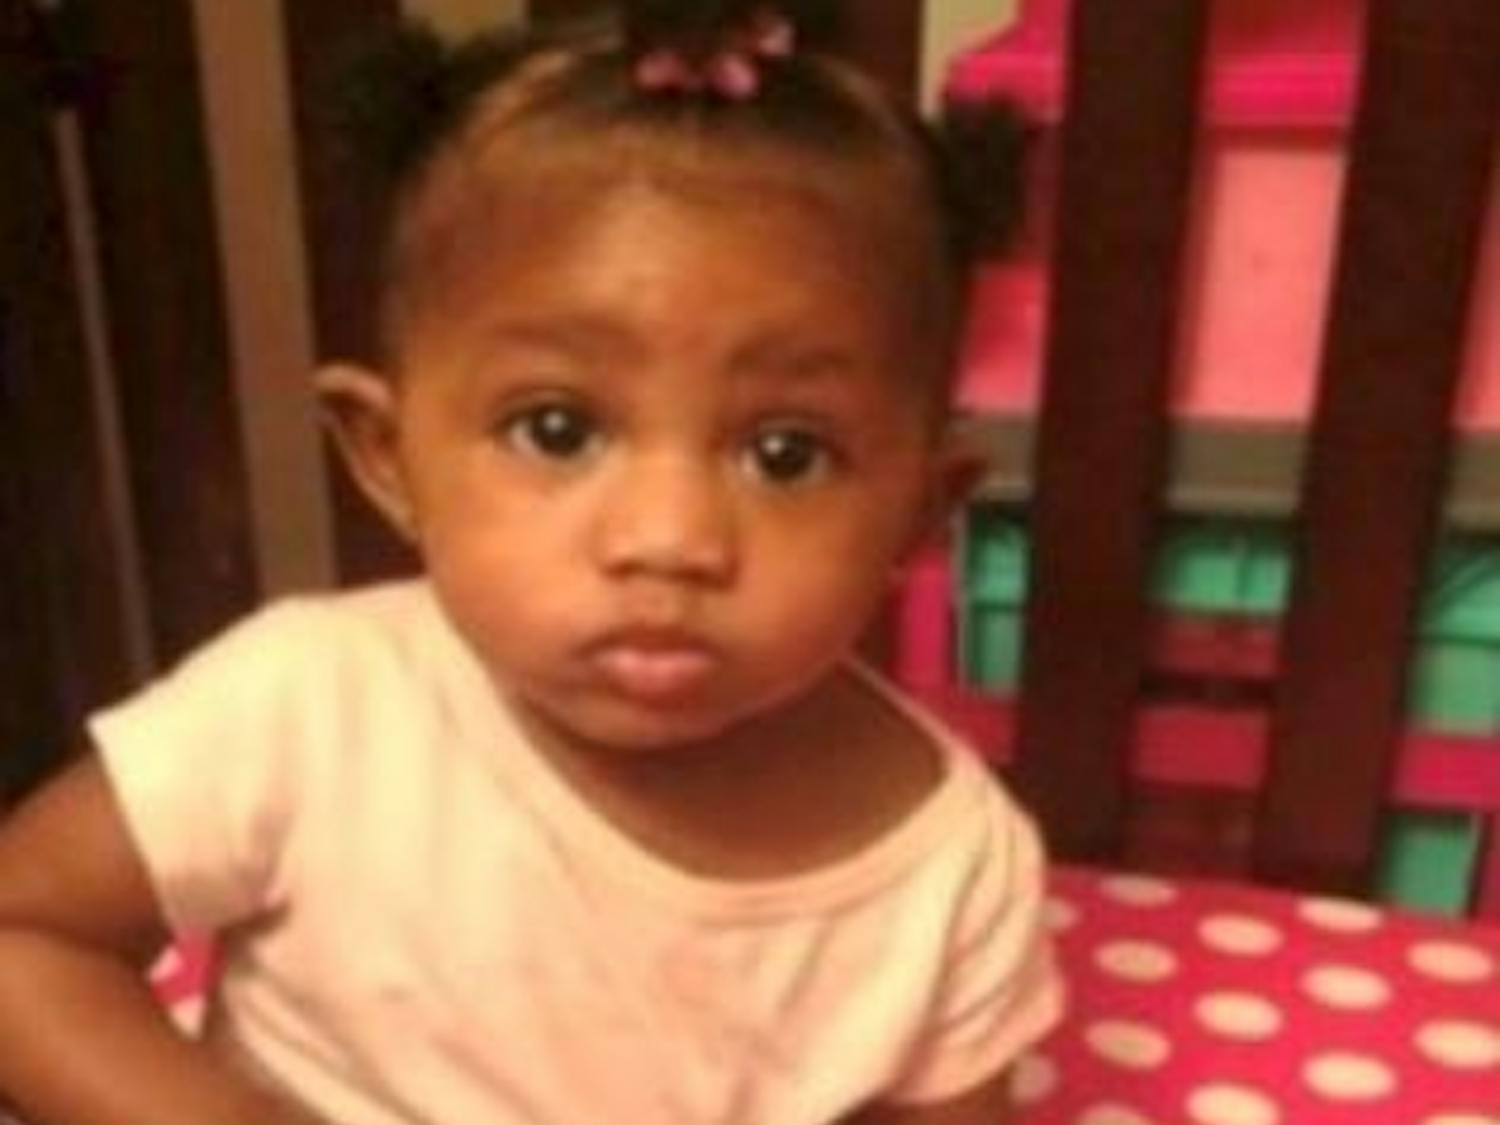 The Madison Police Department requested help Wednesday searching for a 9-month-old girl.